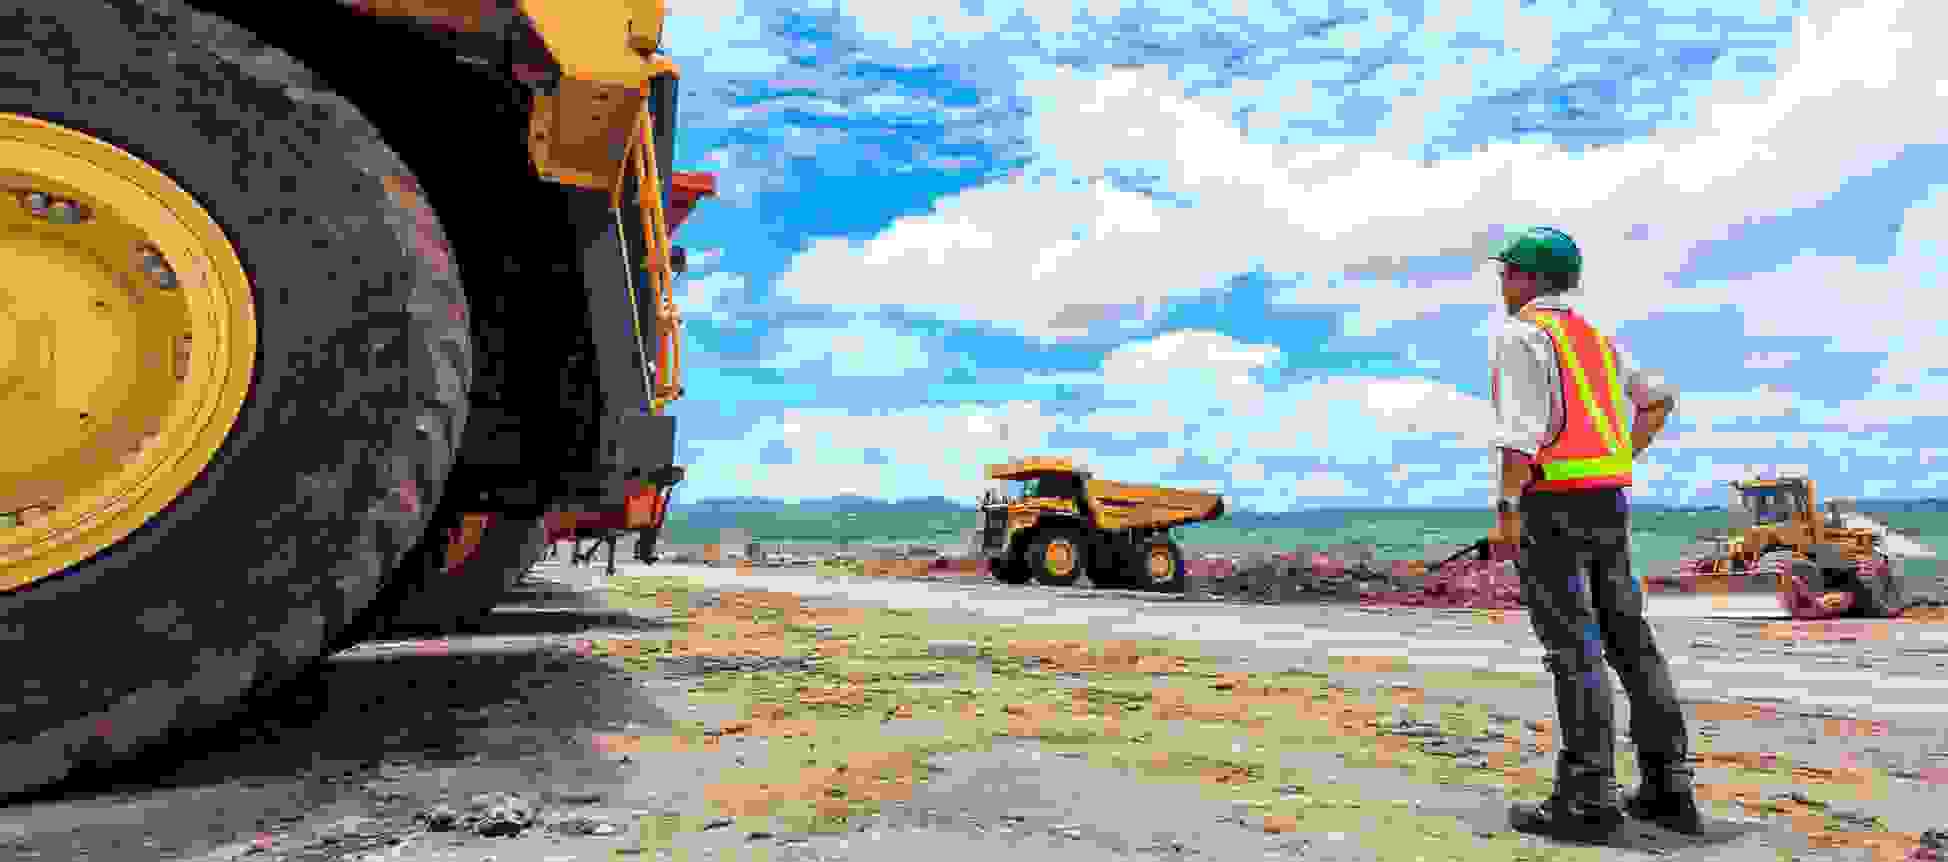 Construction worker at an extraction site surrounded by large vehicles